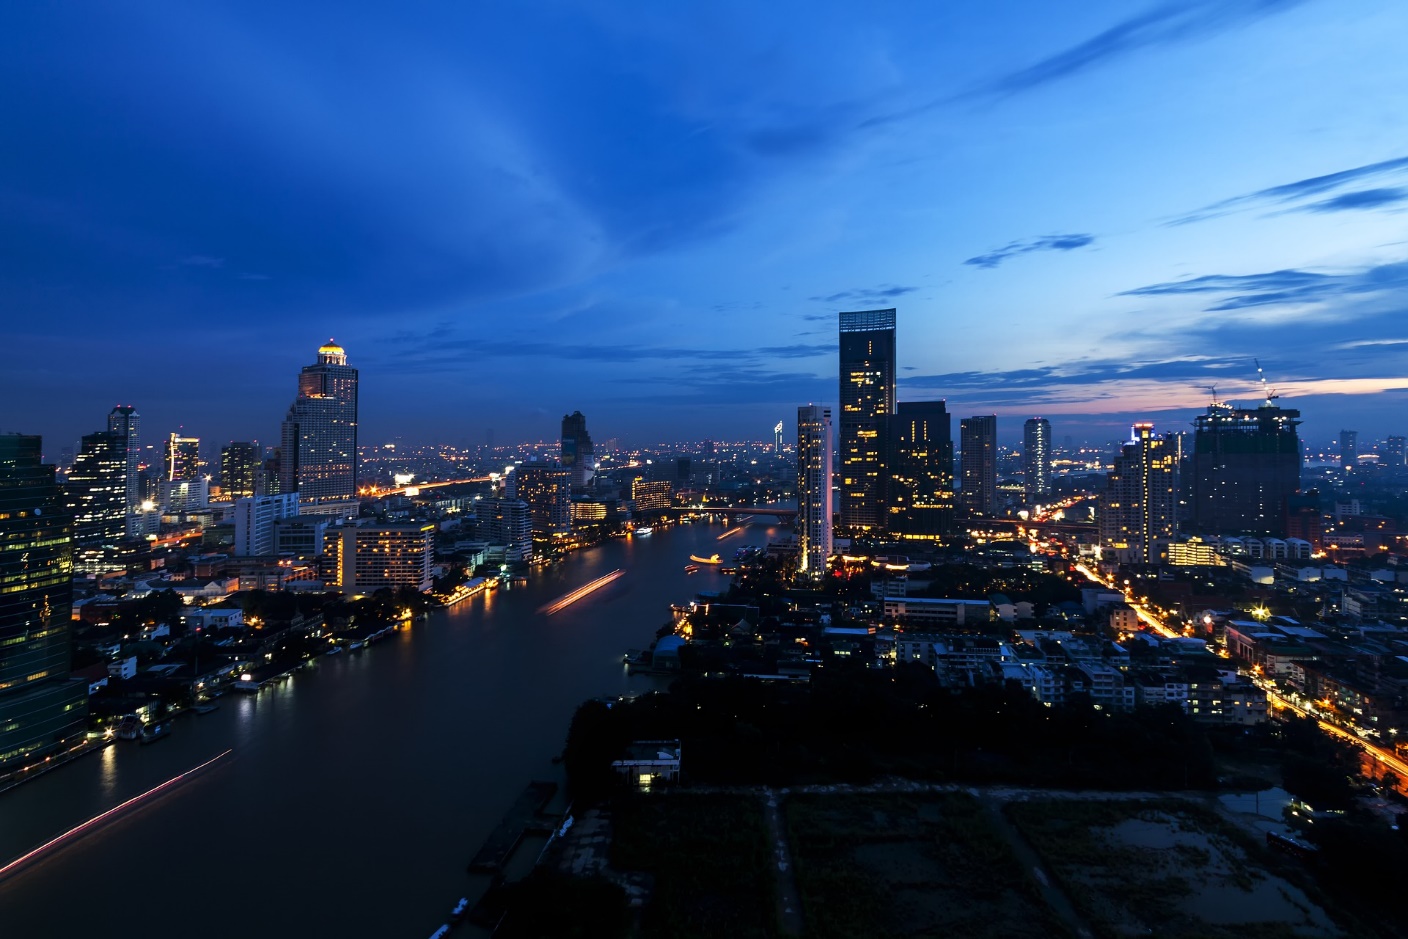 How to See Bangkok in Only 72 Hours